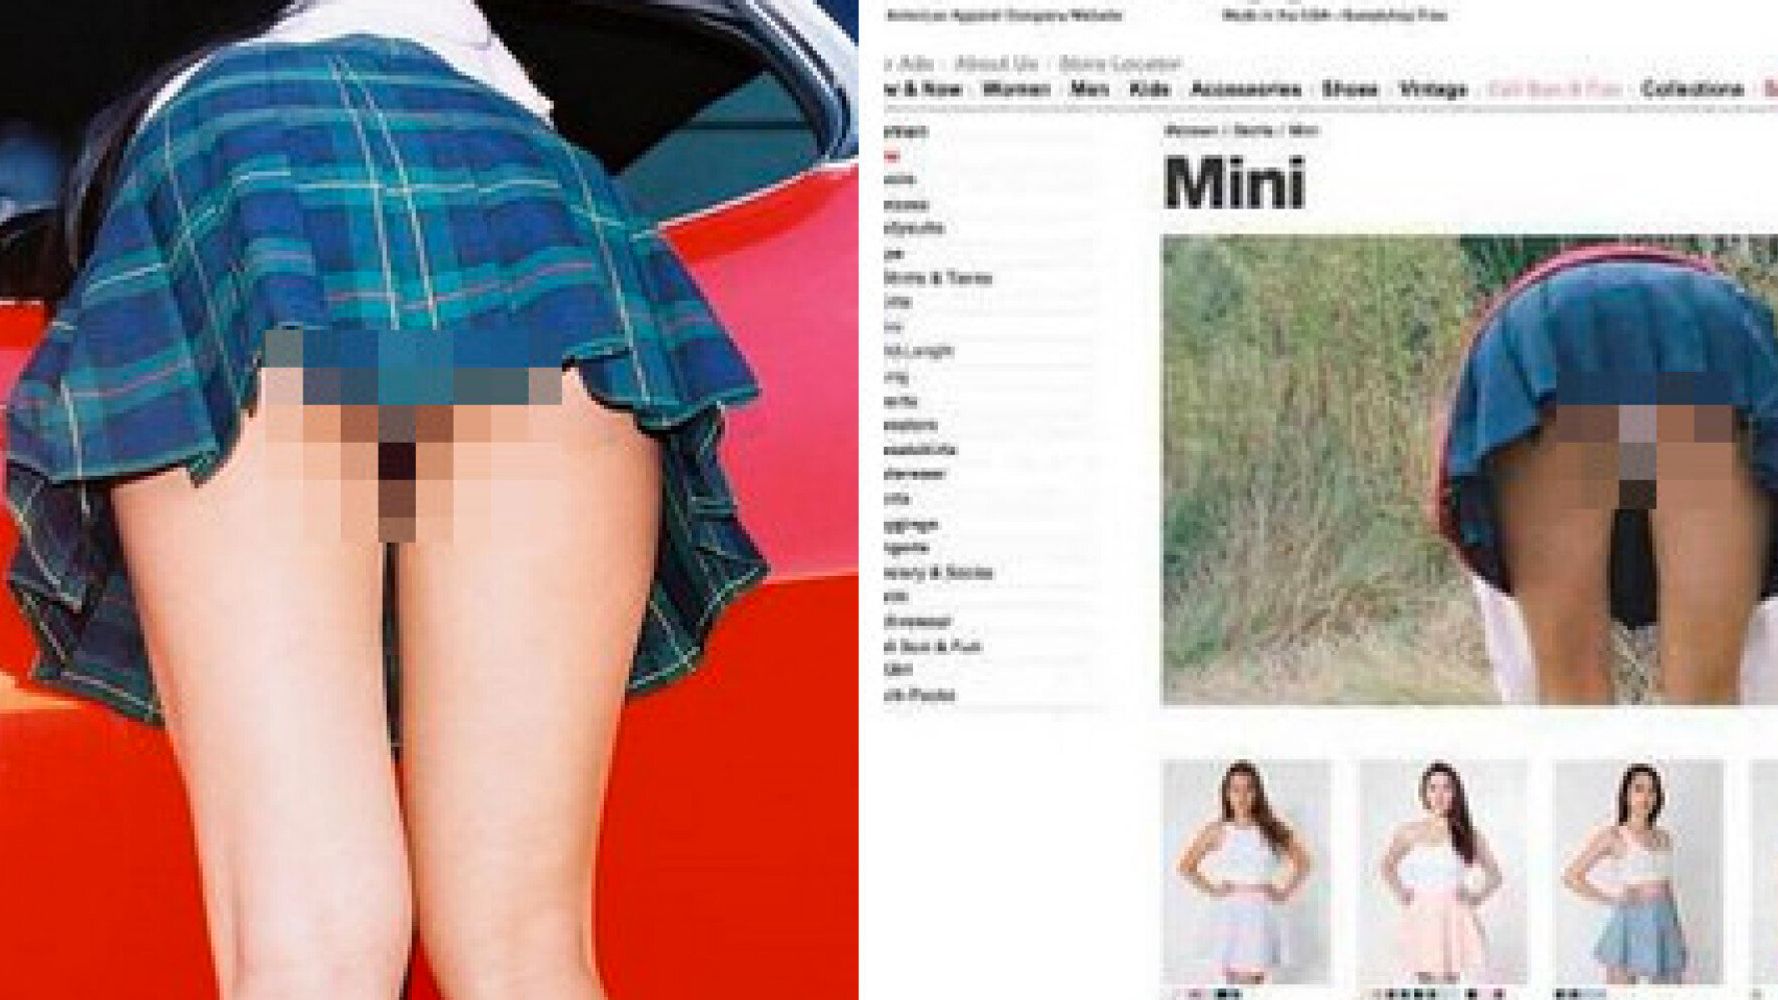 Shoole Hot Saxy - American Apparel 'Sexy School Girl' Skirt Image Labelled 'Underaged Porn'  By The Public | HuffPost UK Life